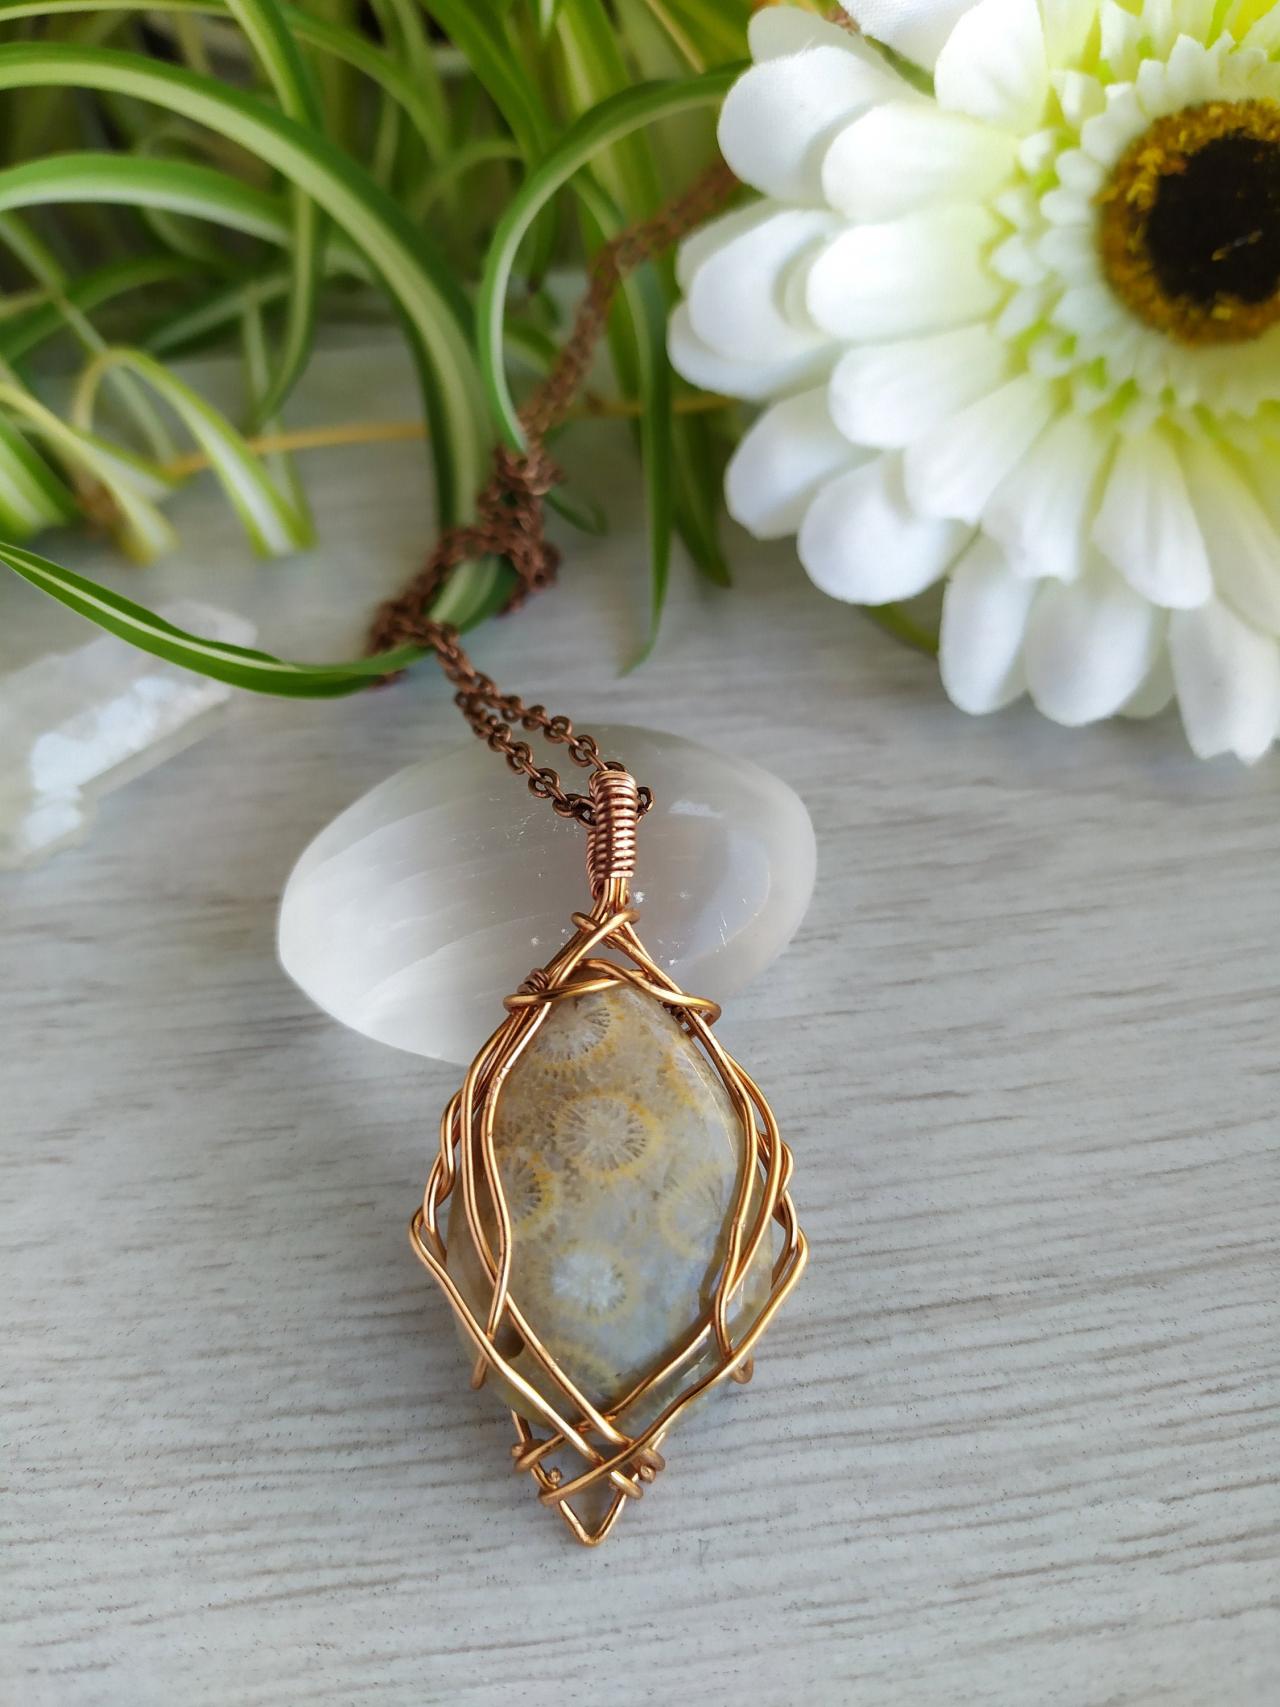 Coral Fossil Jasper Wire Wrapped Pendant, Beige Gemstone Necklace,tumbled Stone Copper Necklace,bohemian Jewelry,natural Stone Boho Necklace